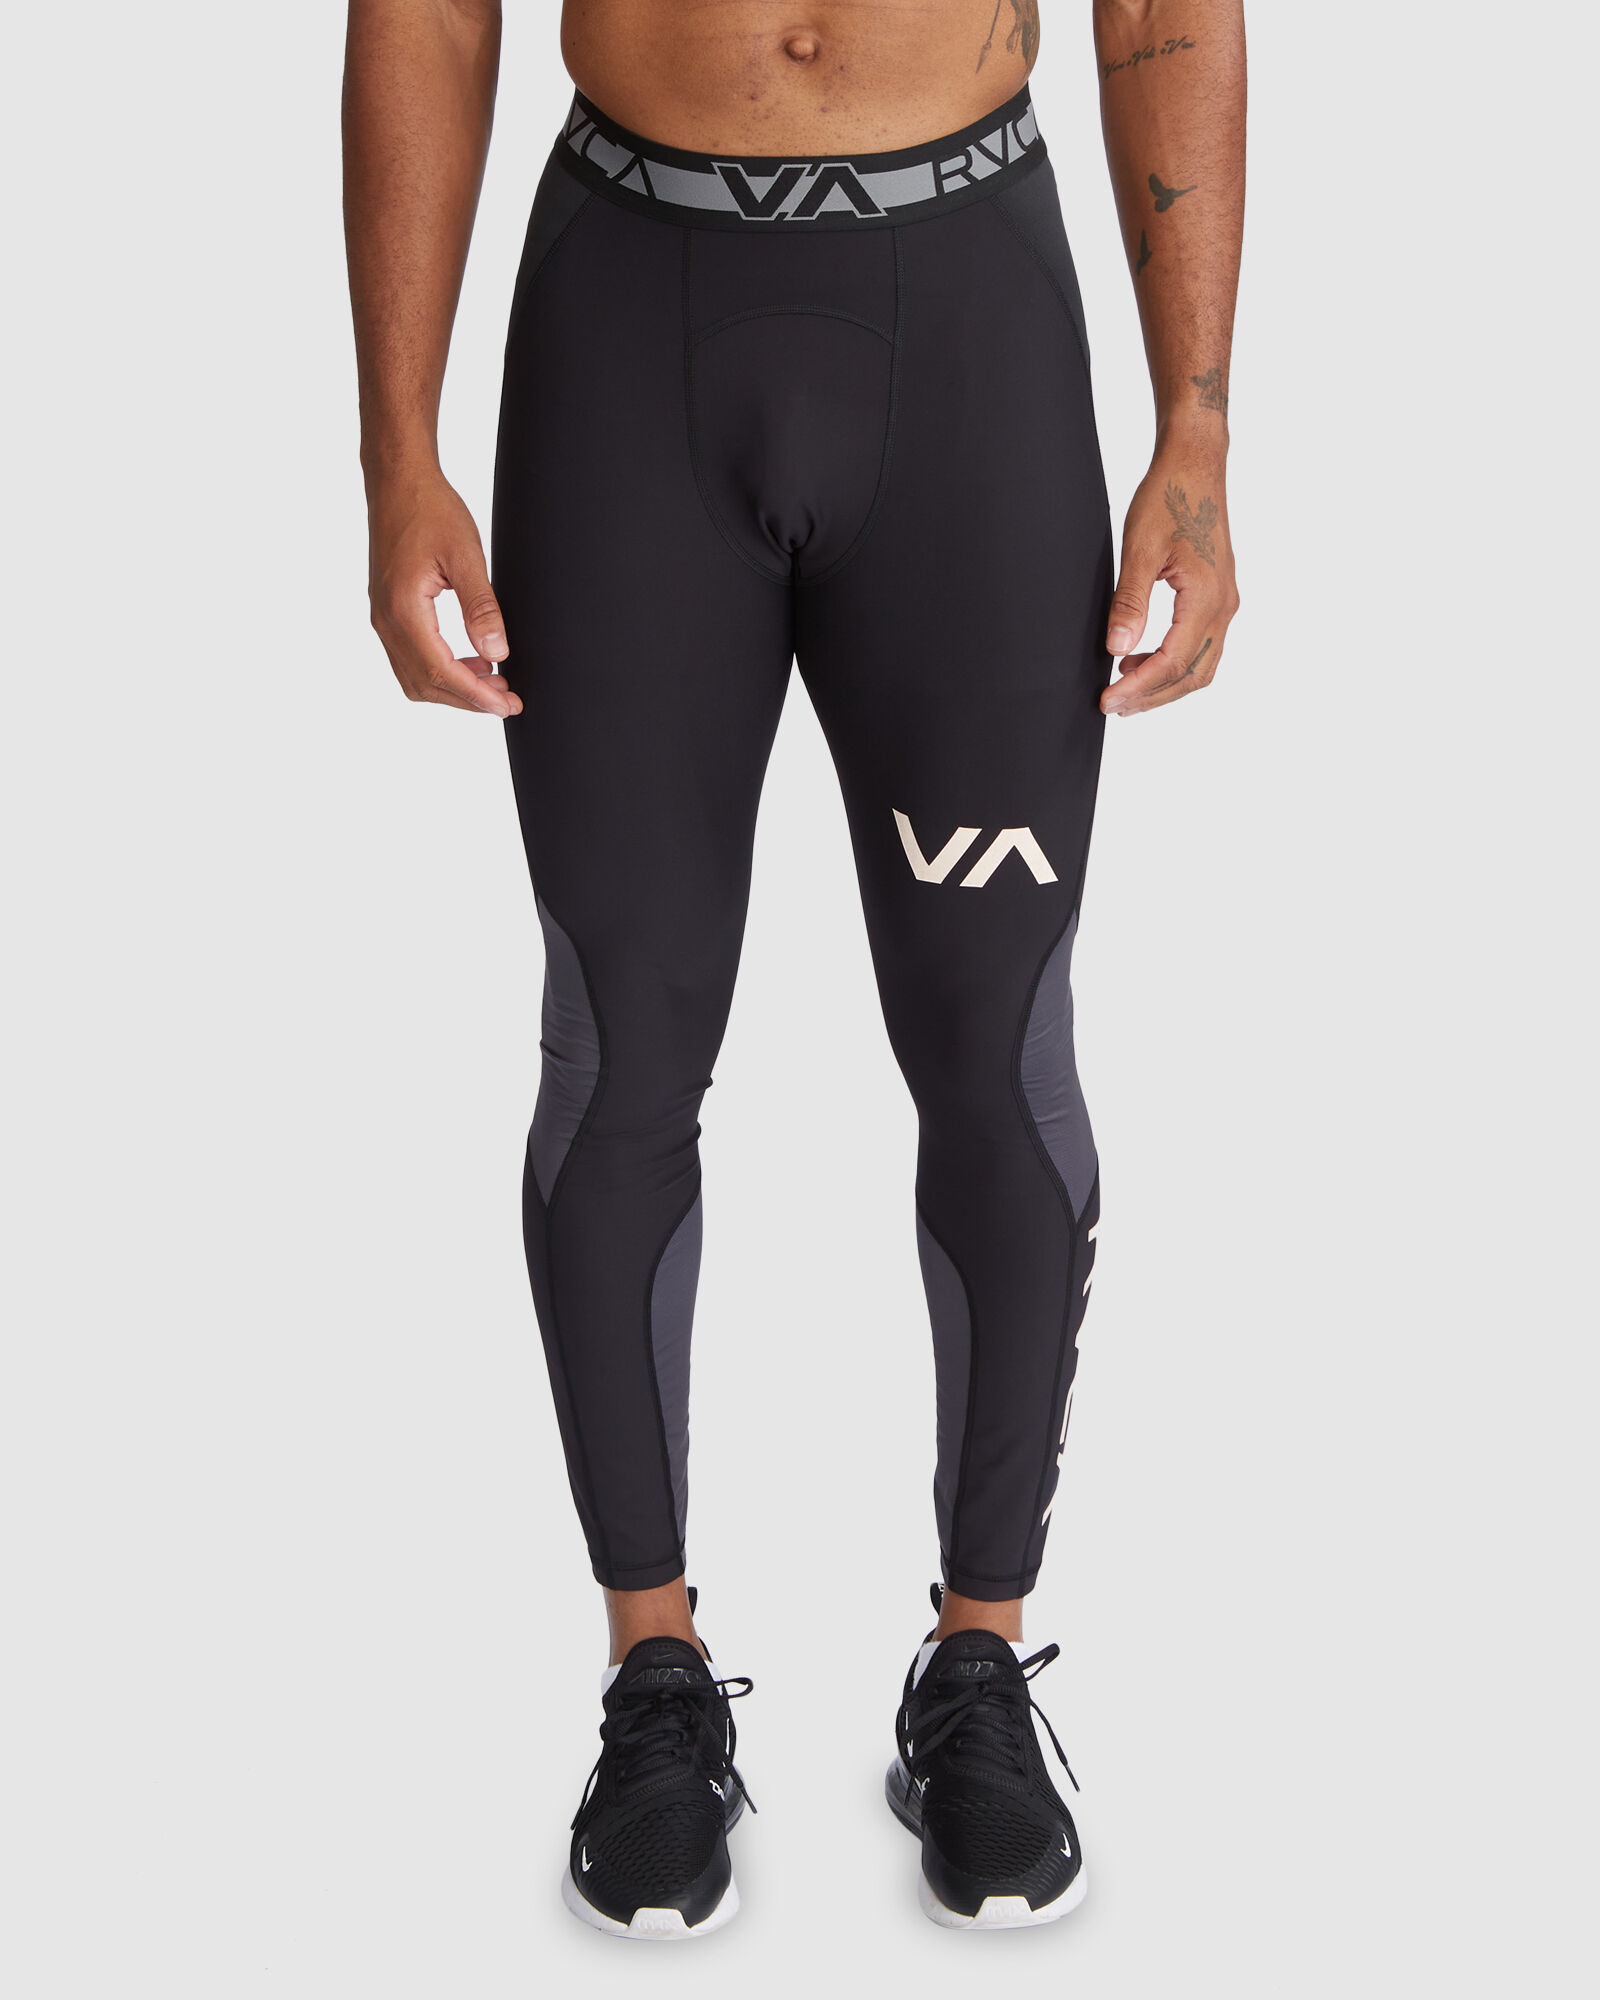 Buy Belity 3 Pack Men's Compression Pants Quick Dry Sport Tights Baselayer  Running Workout Active Athletic Leggings with Pockets at Amazon.in